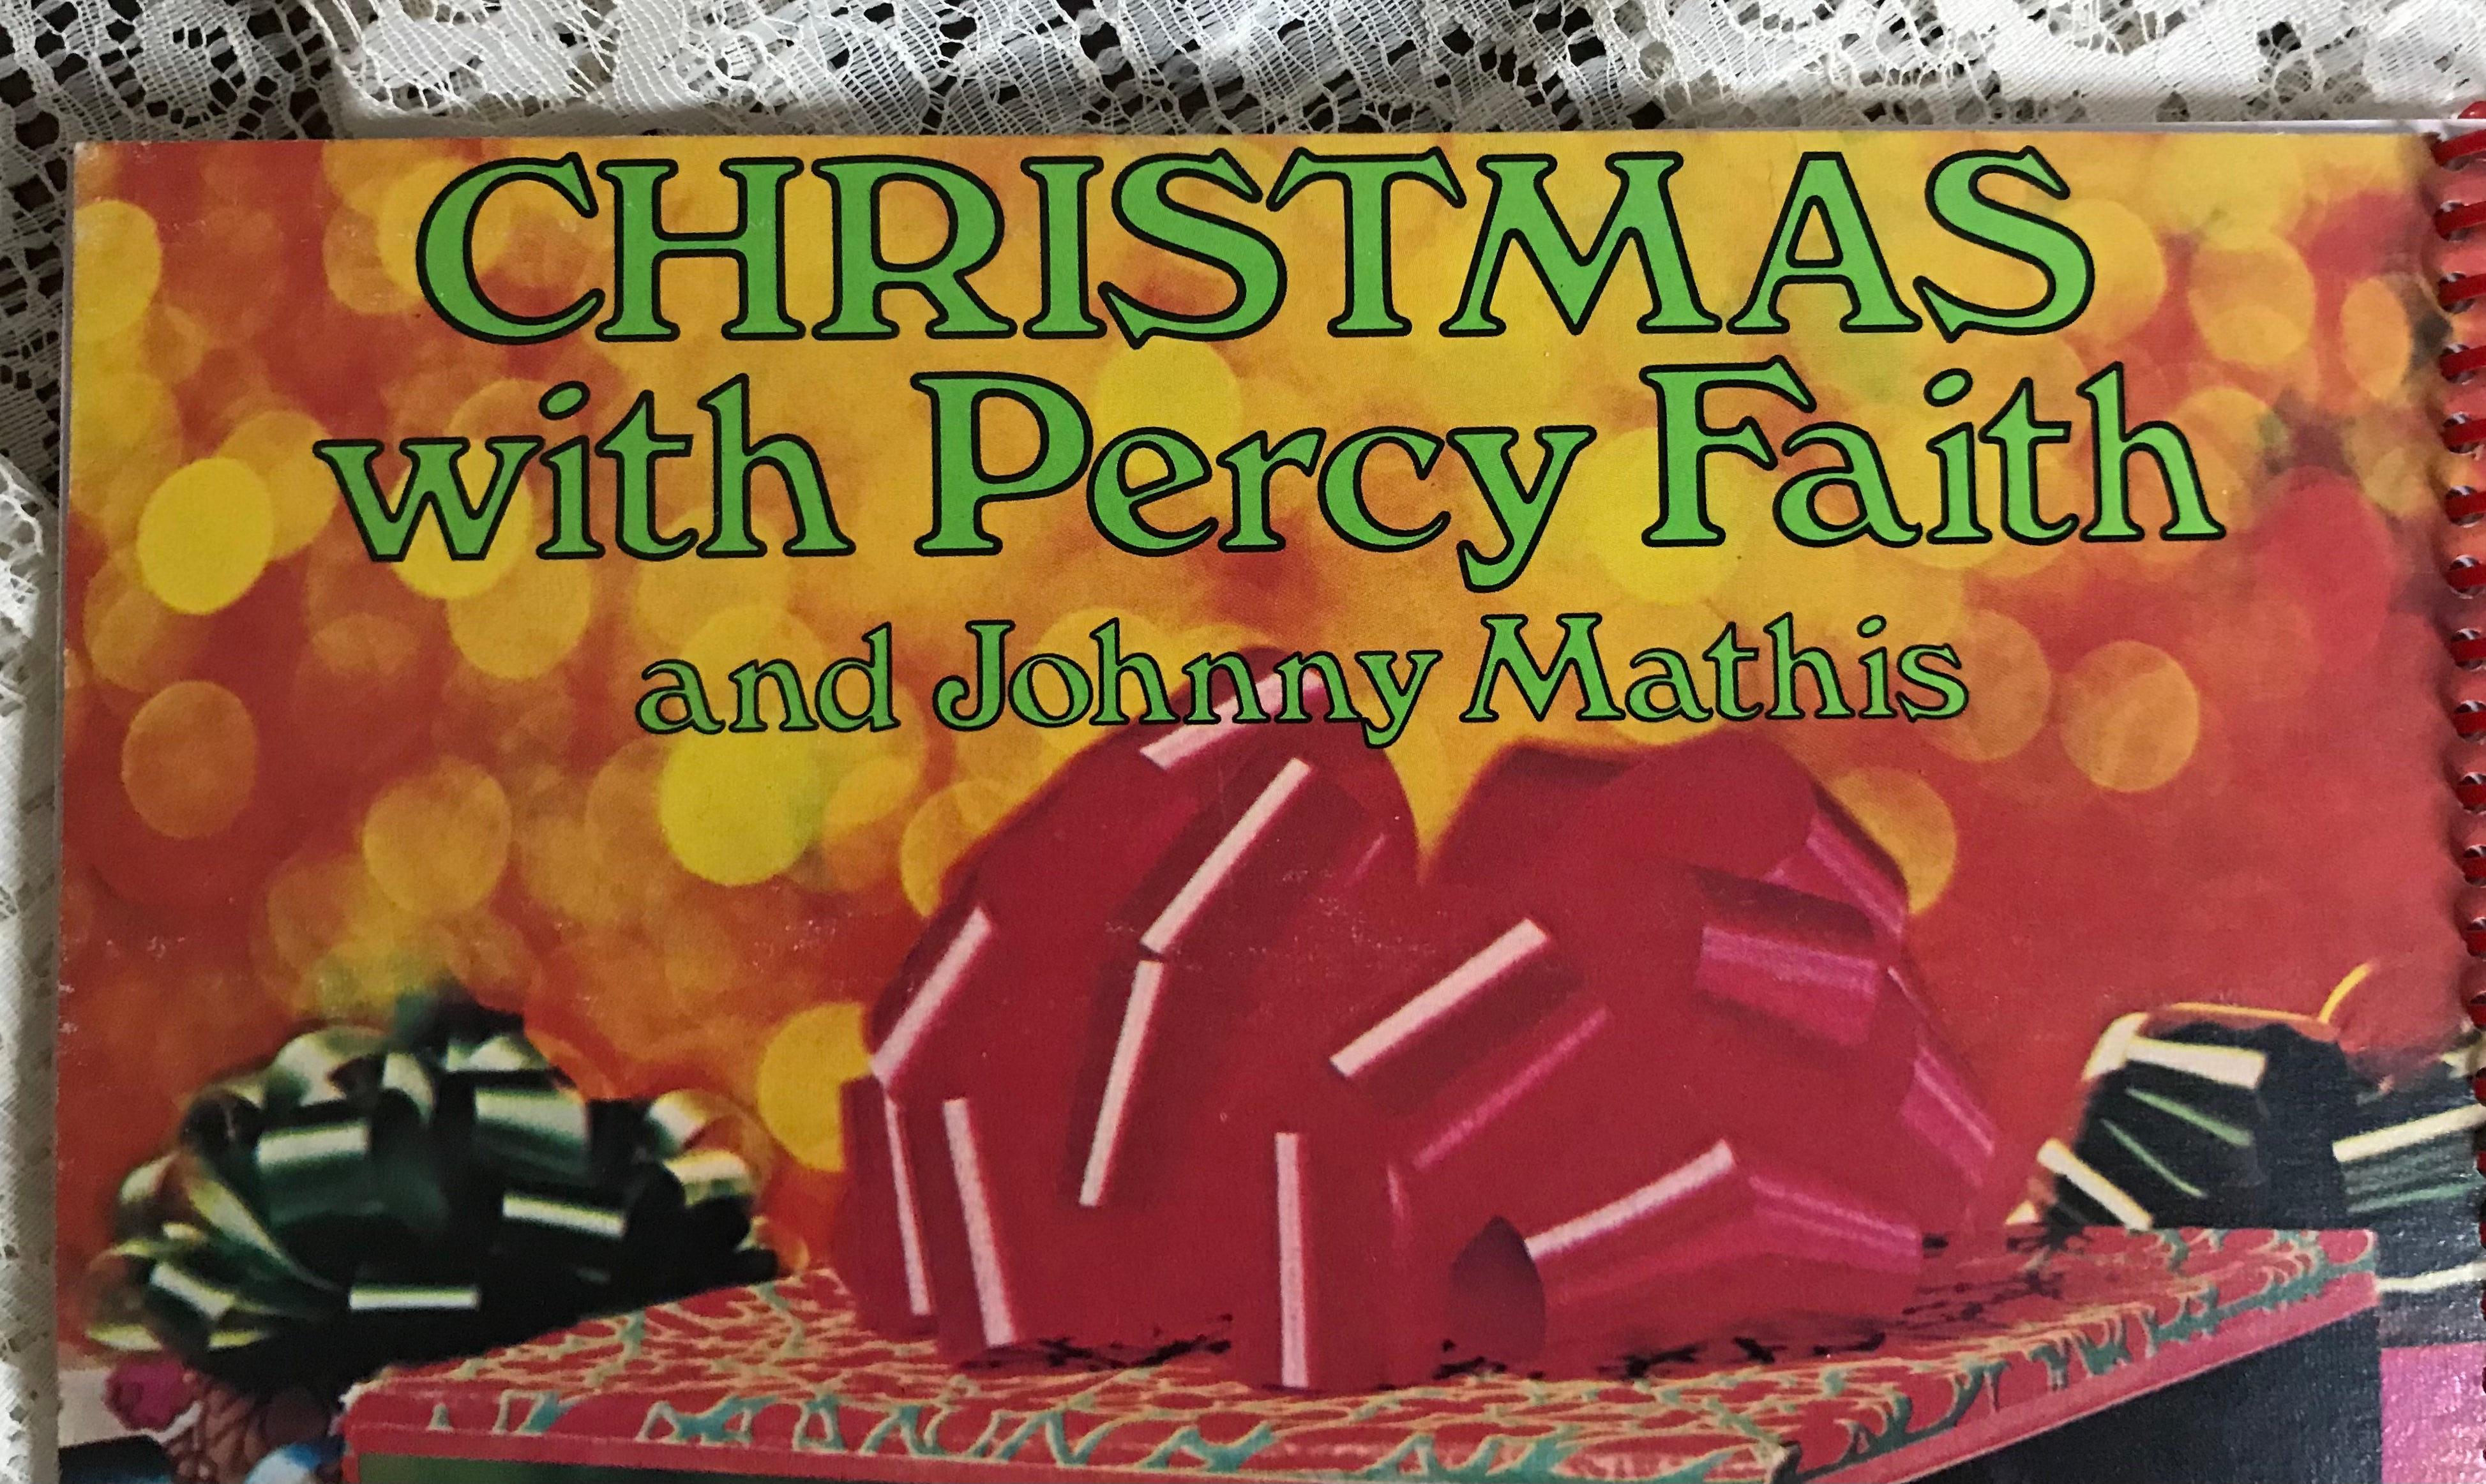 Christmas with Johnny Mathis and Percy Faith Album Cover Notebook